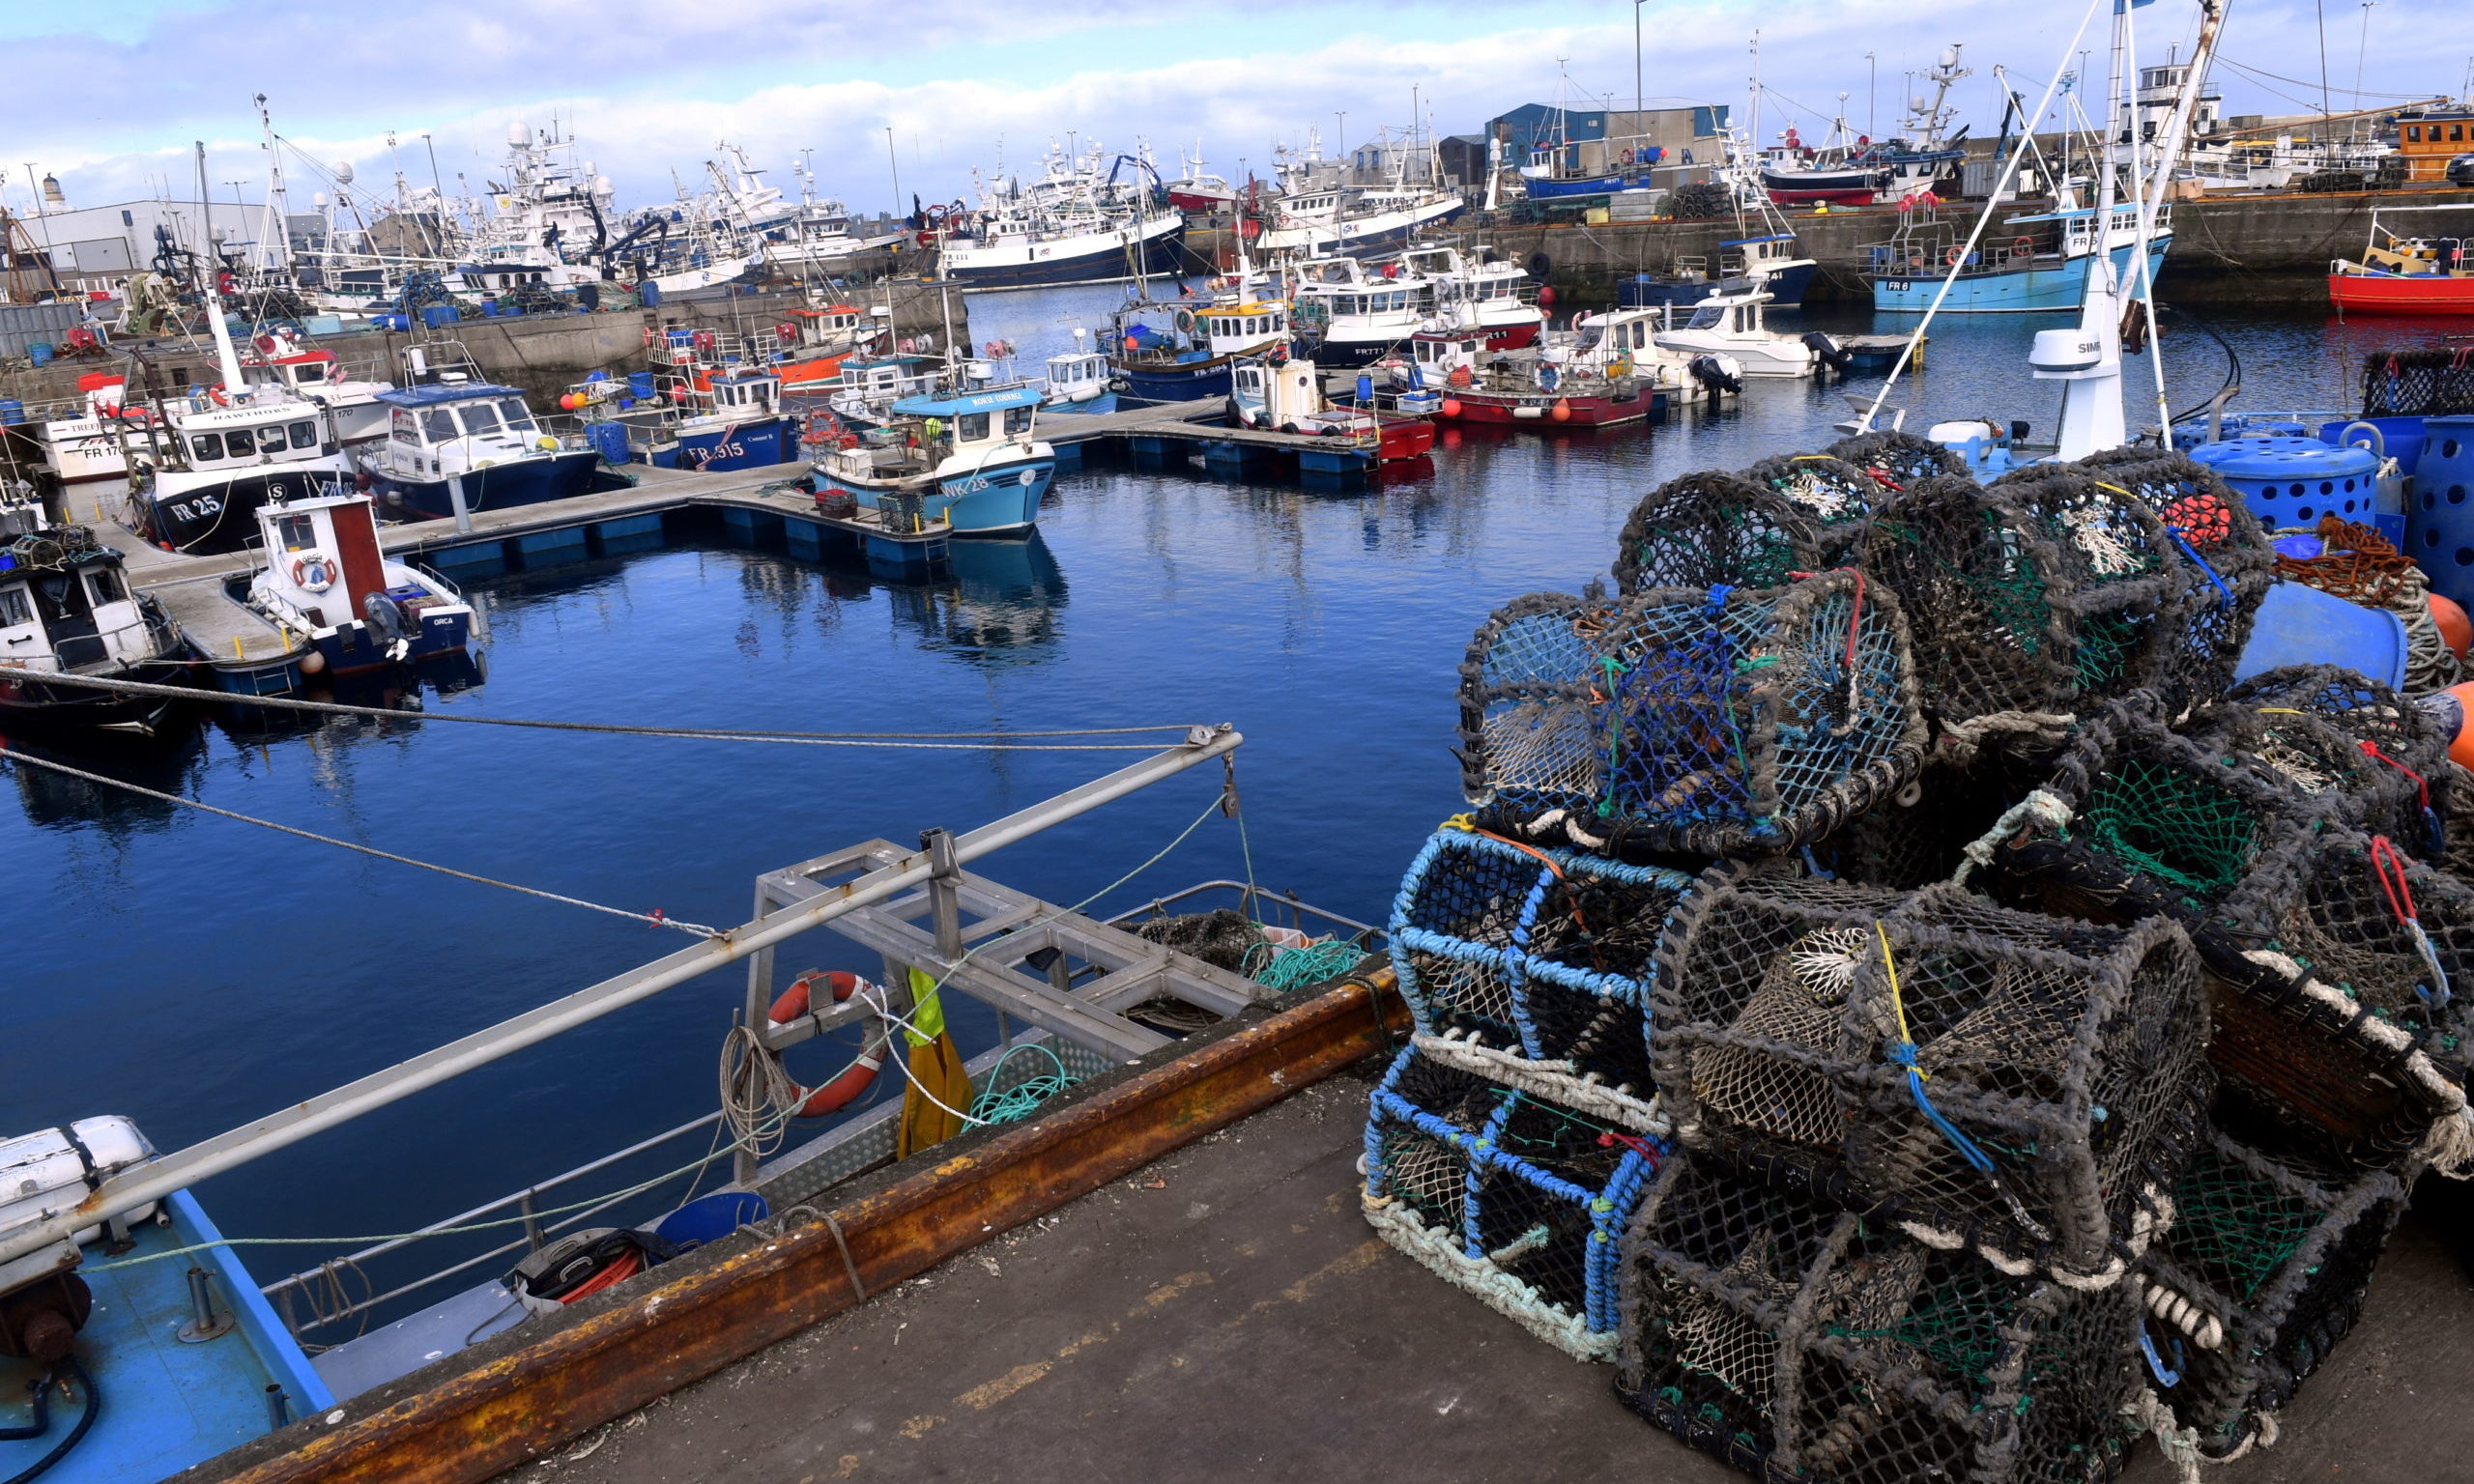 Moored fishing boats in Fraserburgh Harbour during lockdown.